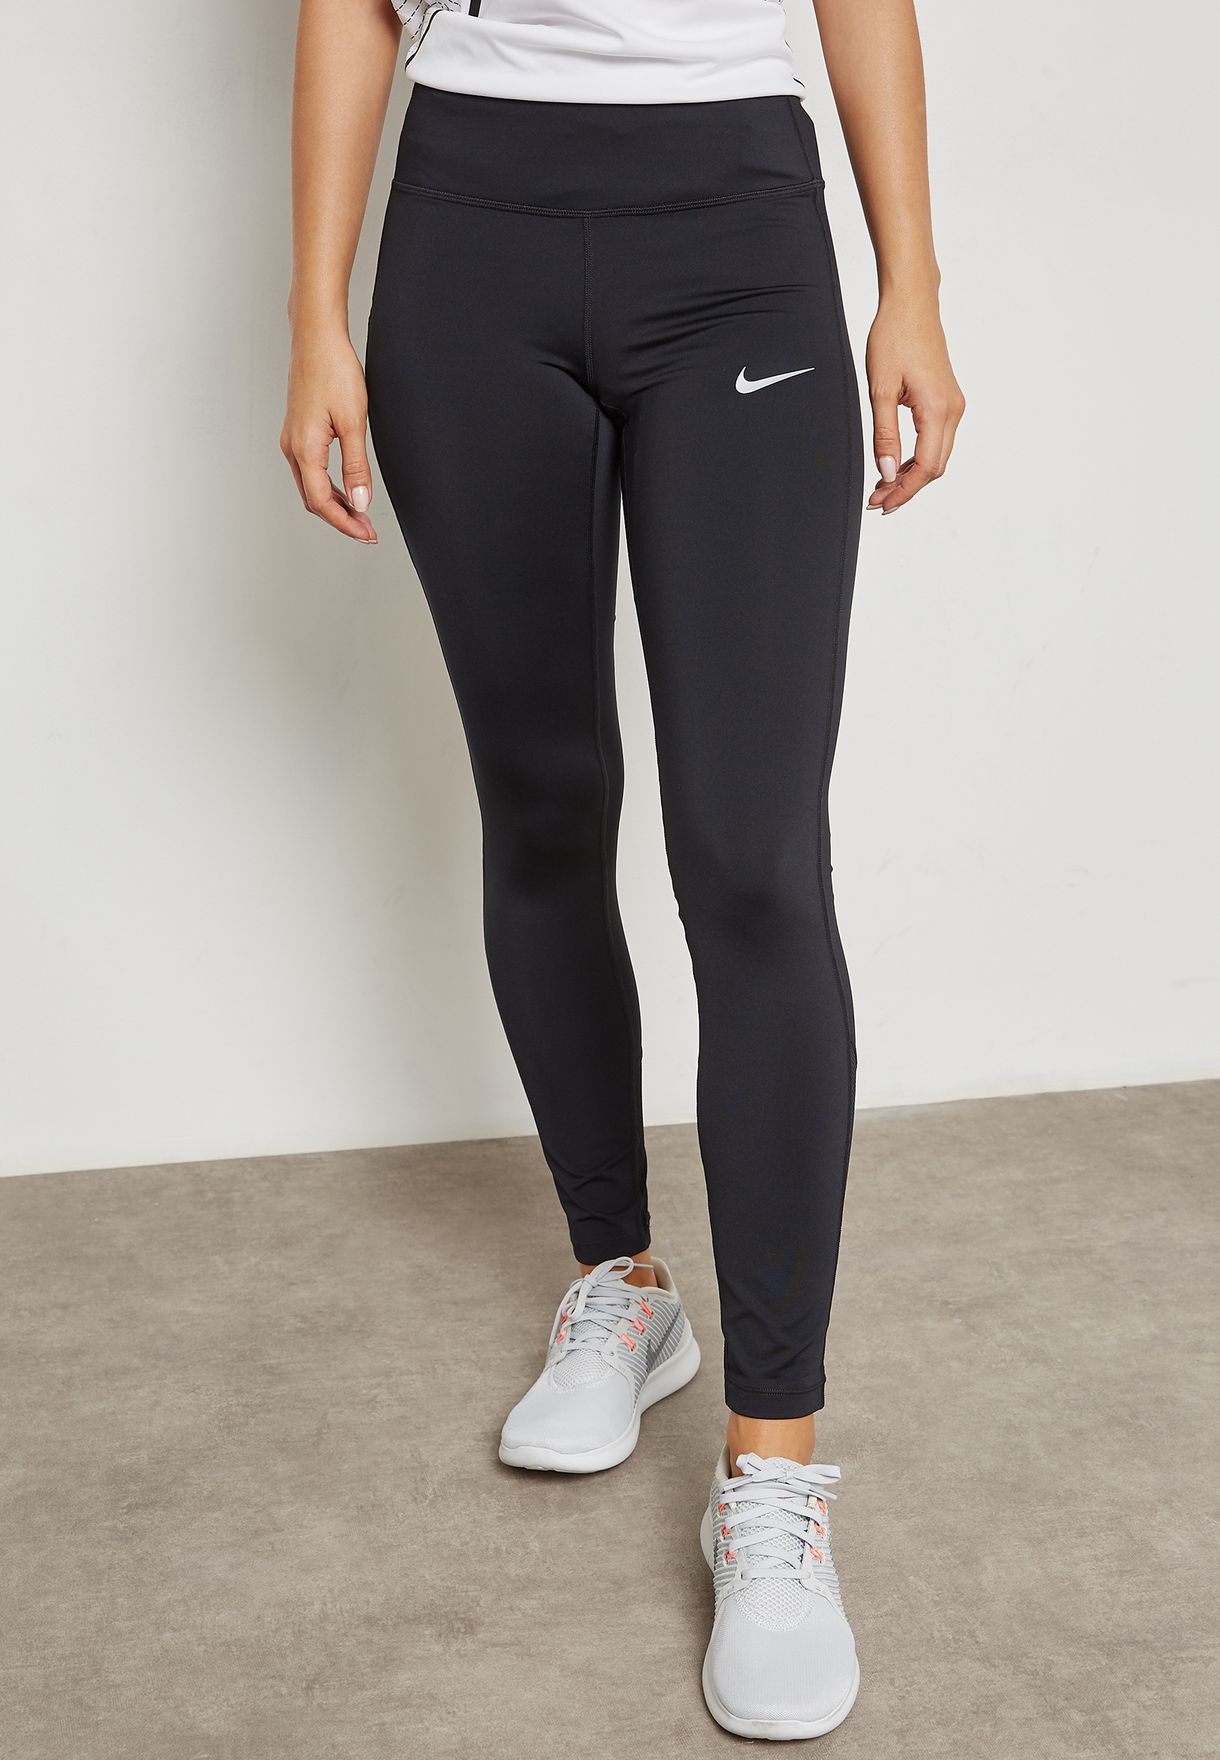 nike performance racer tights